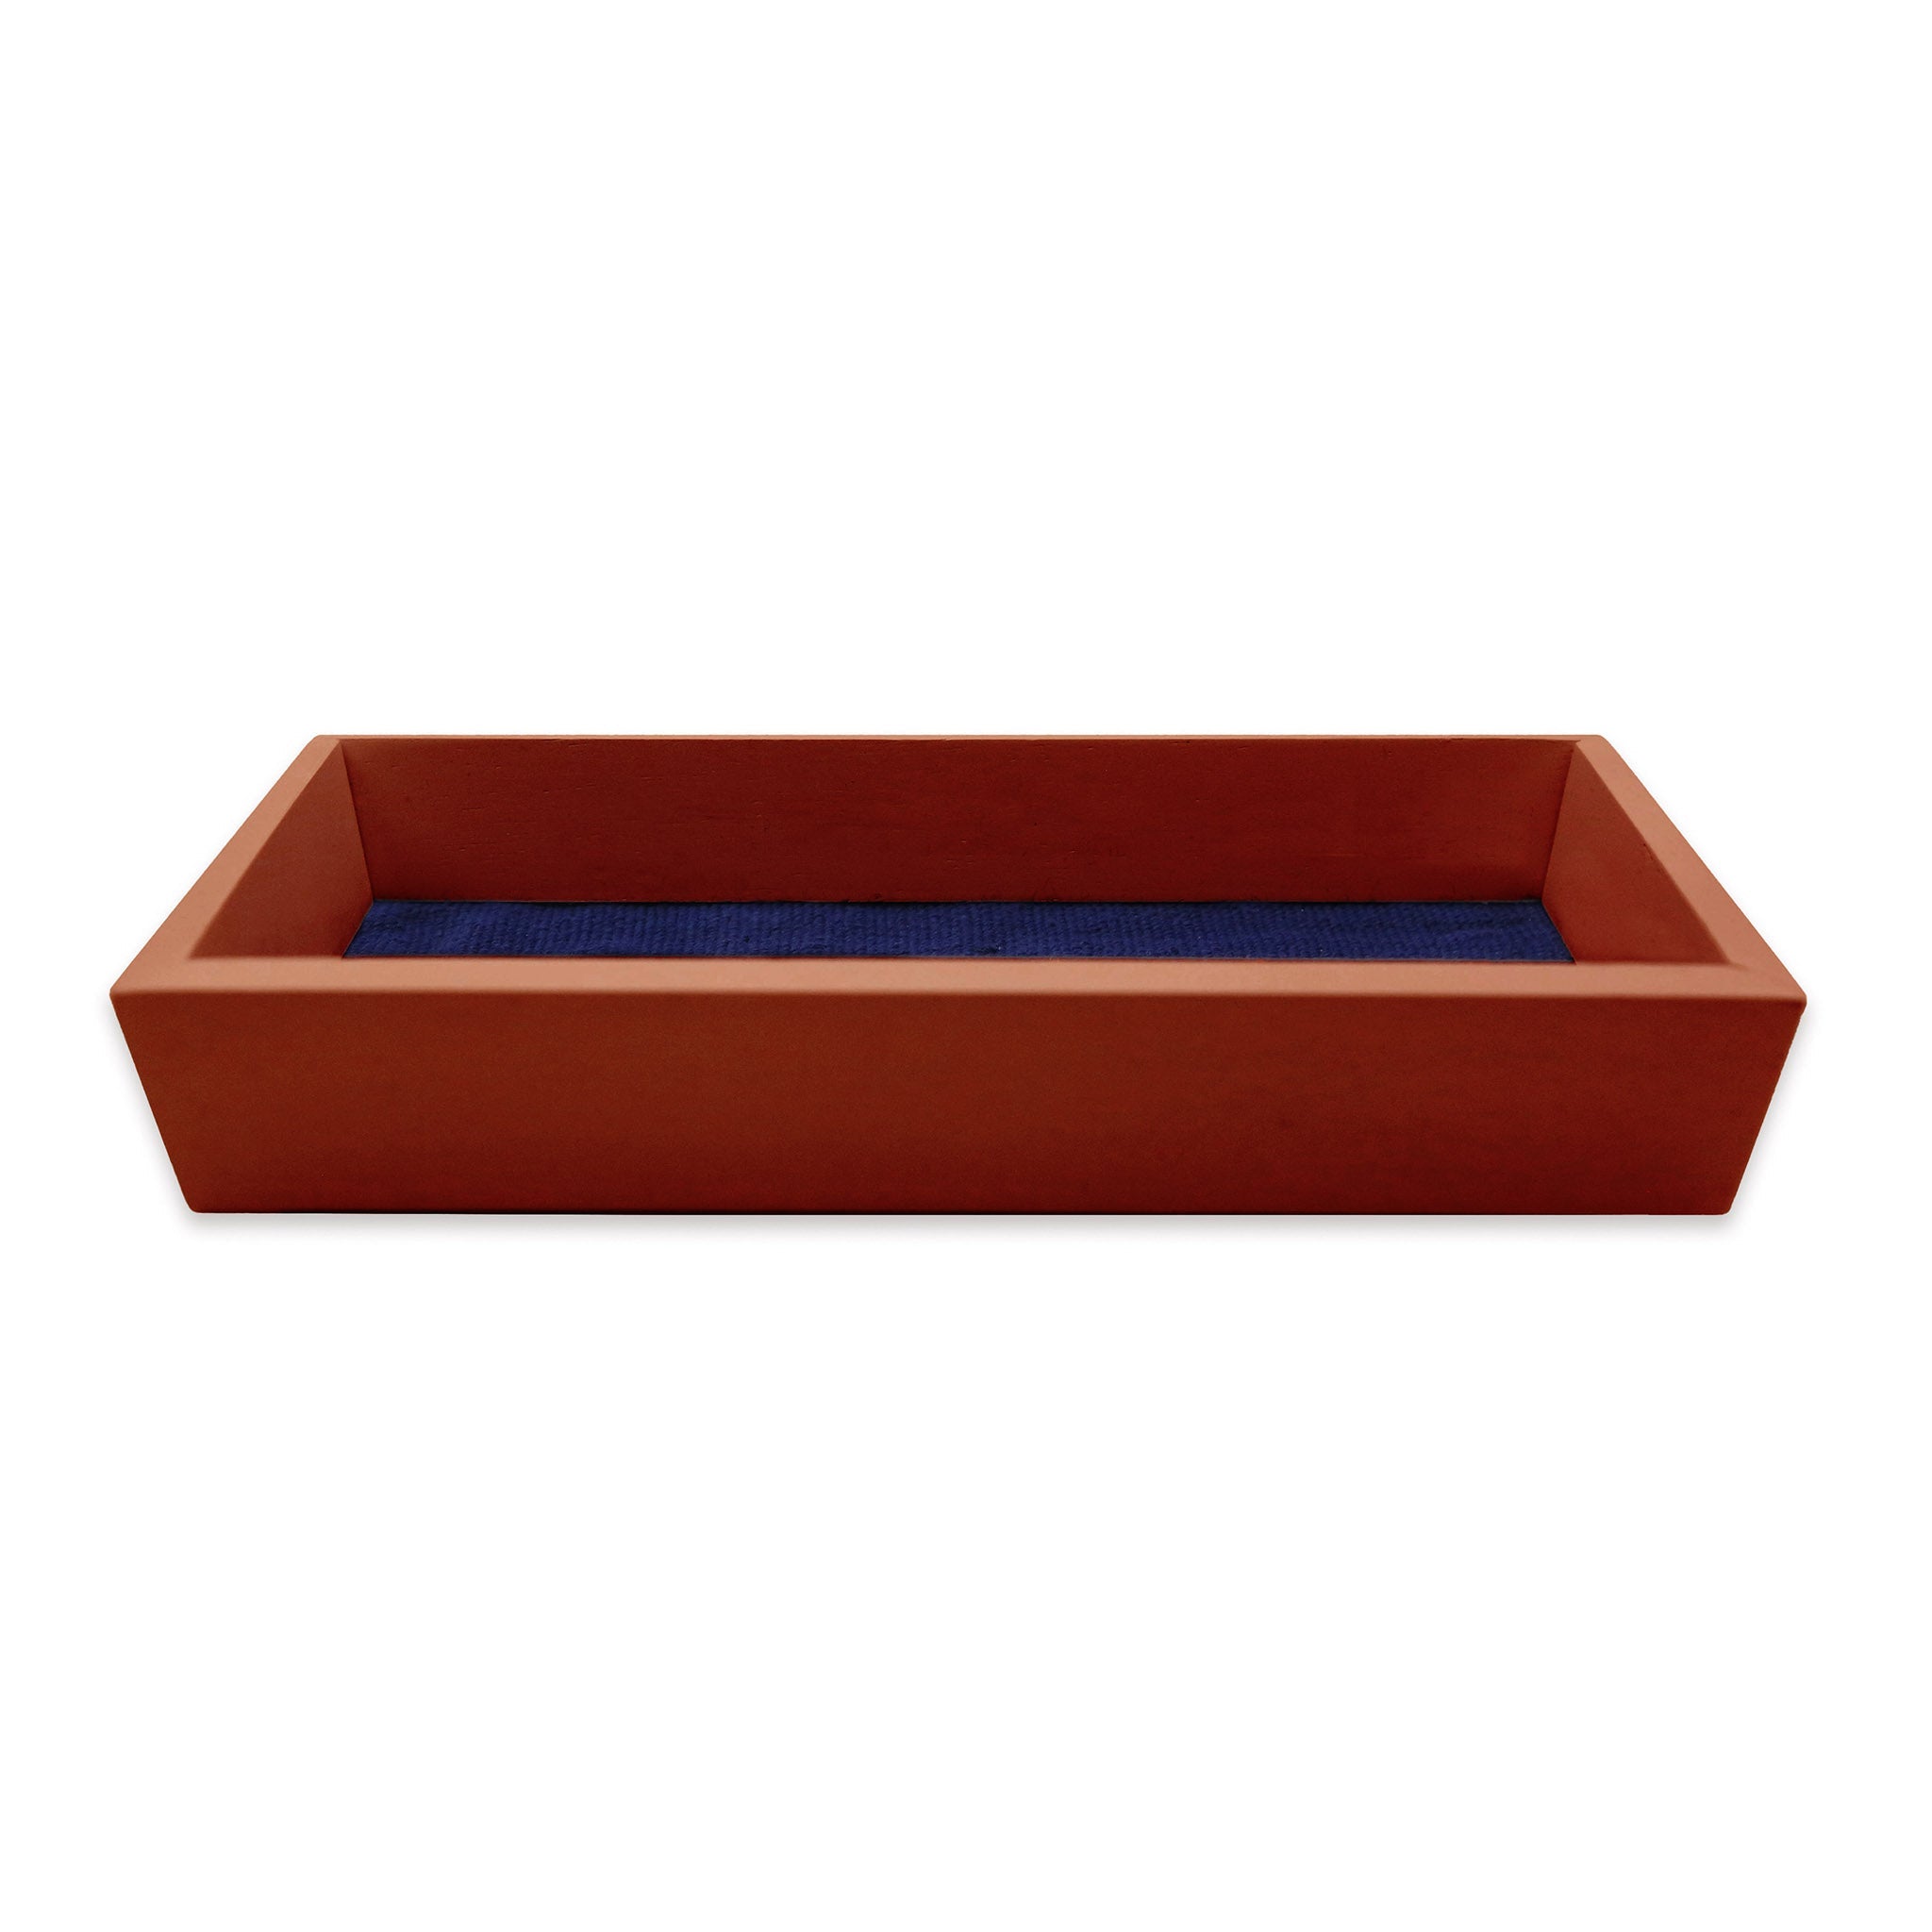 NC State Valet Tray (Red) (Chestnut Wood)